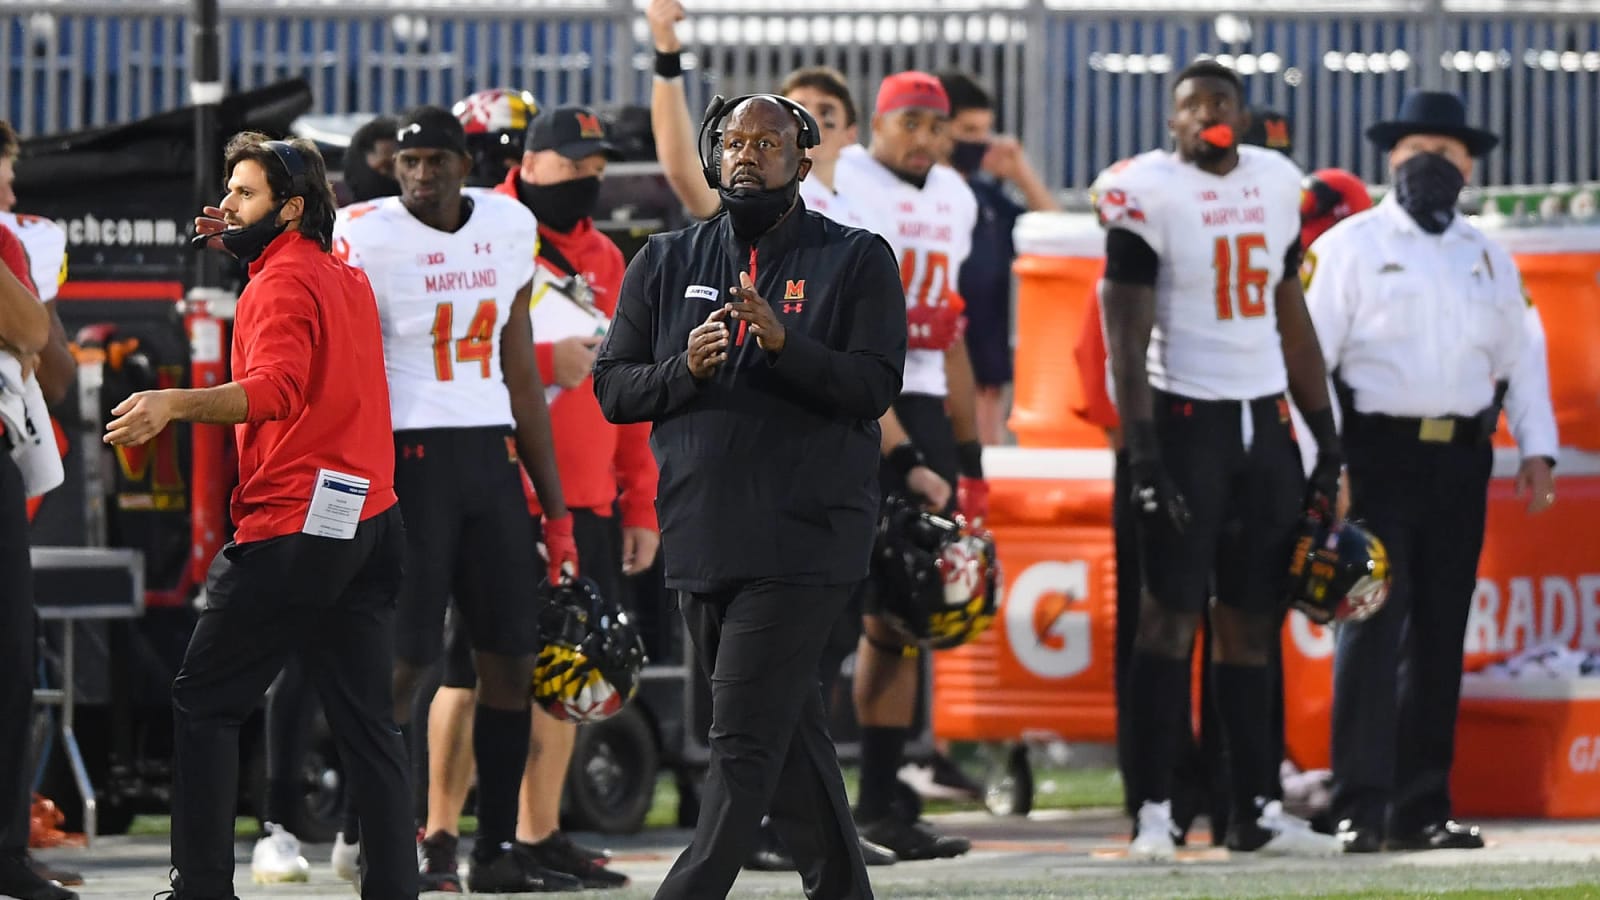 Maryland resumes practice ahead of Indiana clash